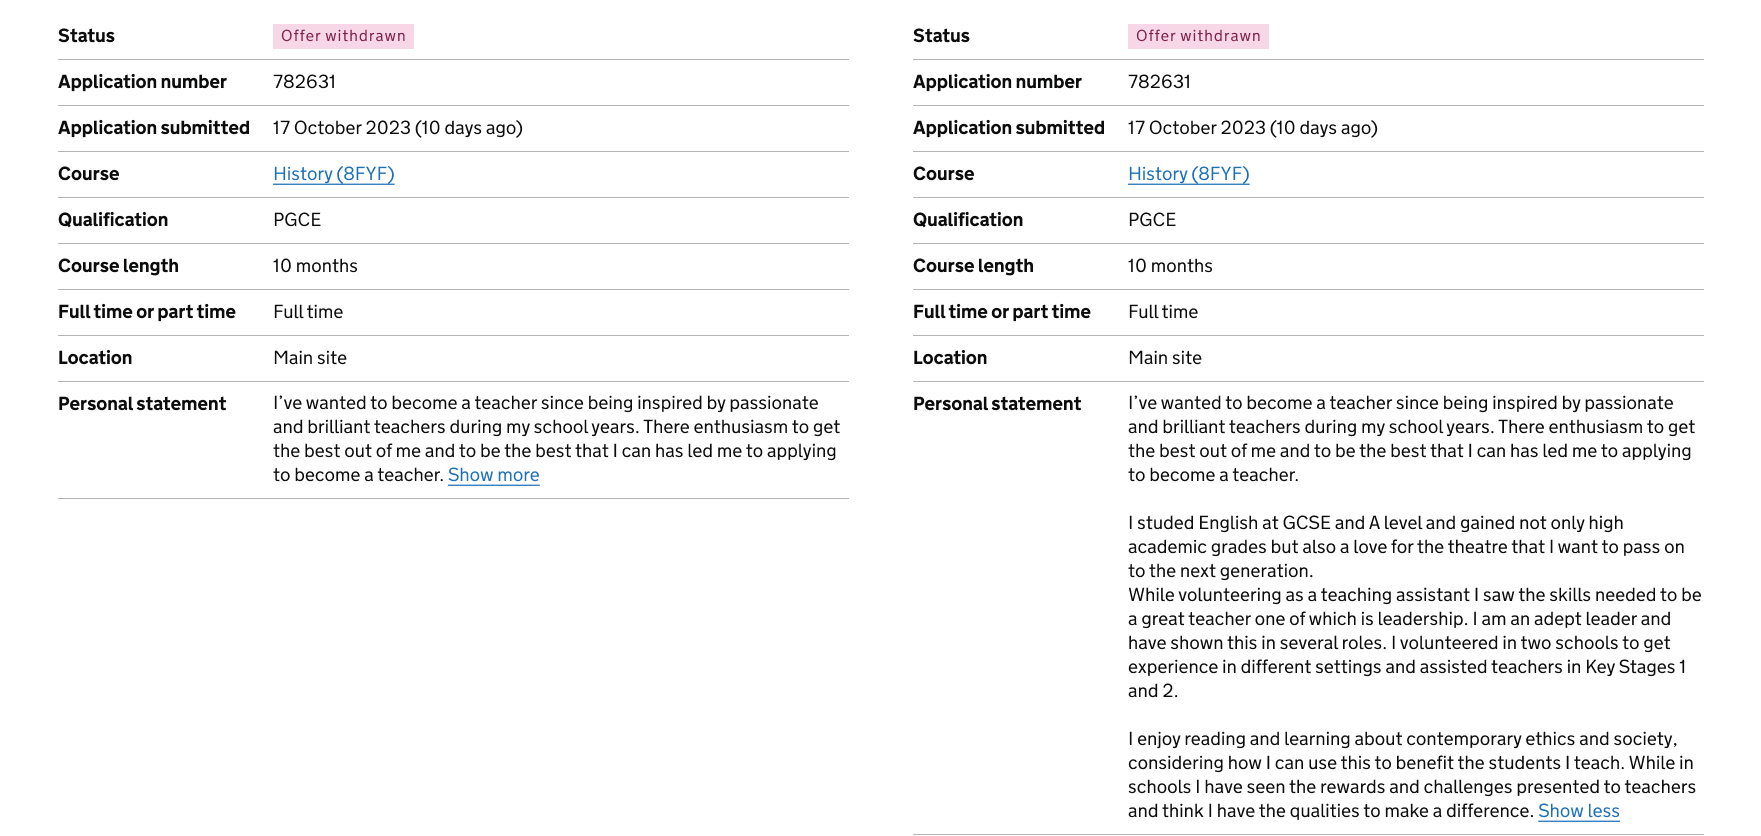 Screenshot of 'Offer withdrawn' status, showcasing the difference beween 'show more' and 'show less' functionality of personal statement in the application summary